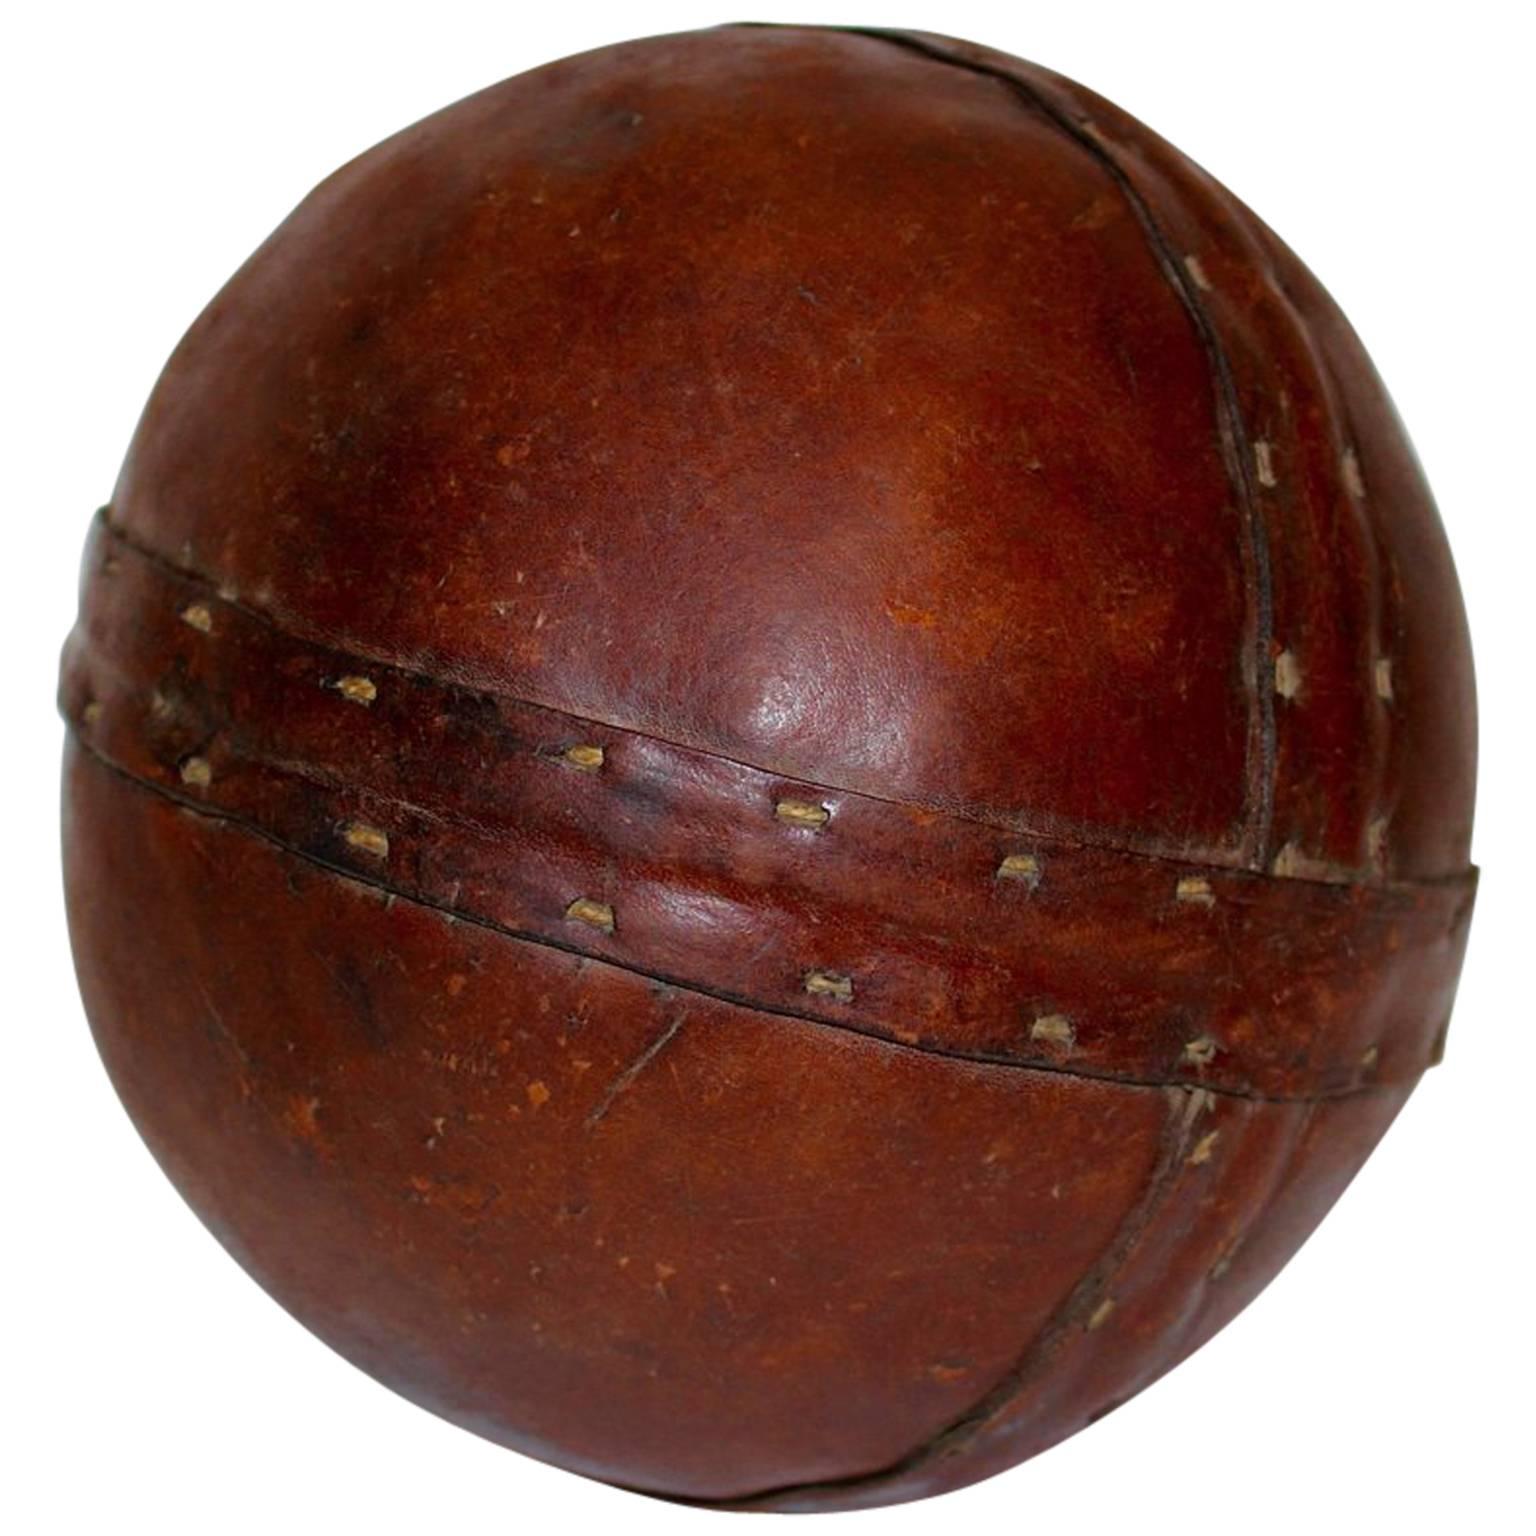 Art Deco Era Vintage Brown Stitched Leather Ball, 1920s